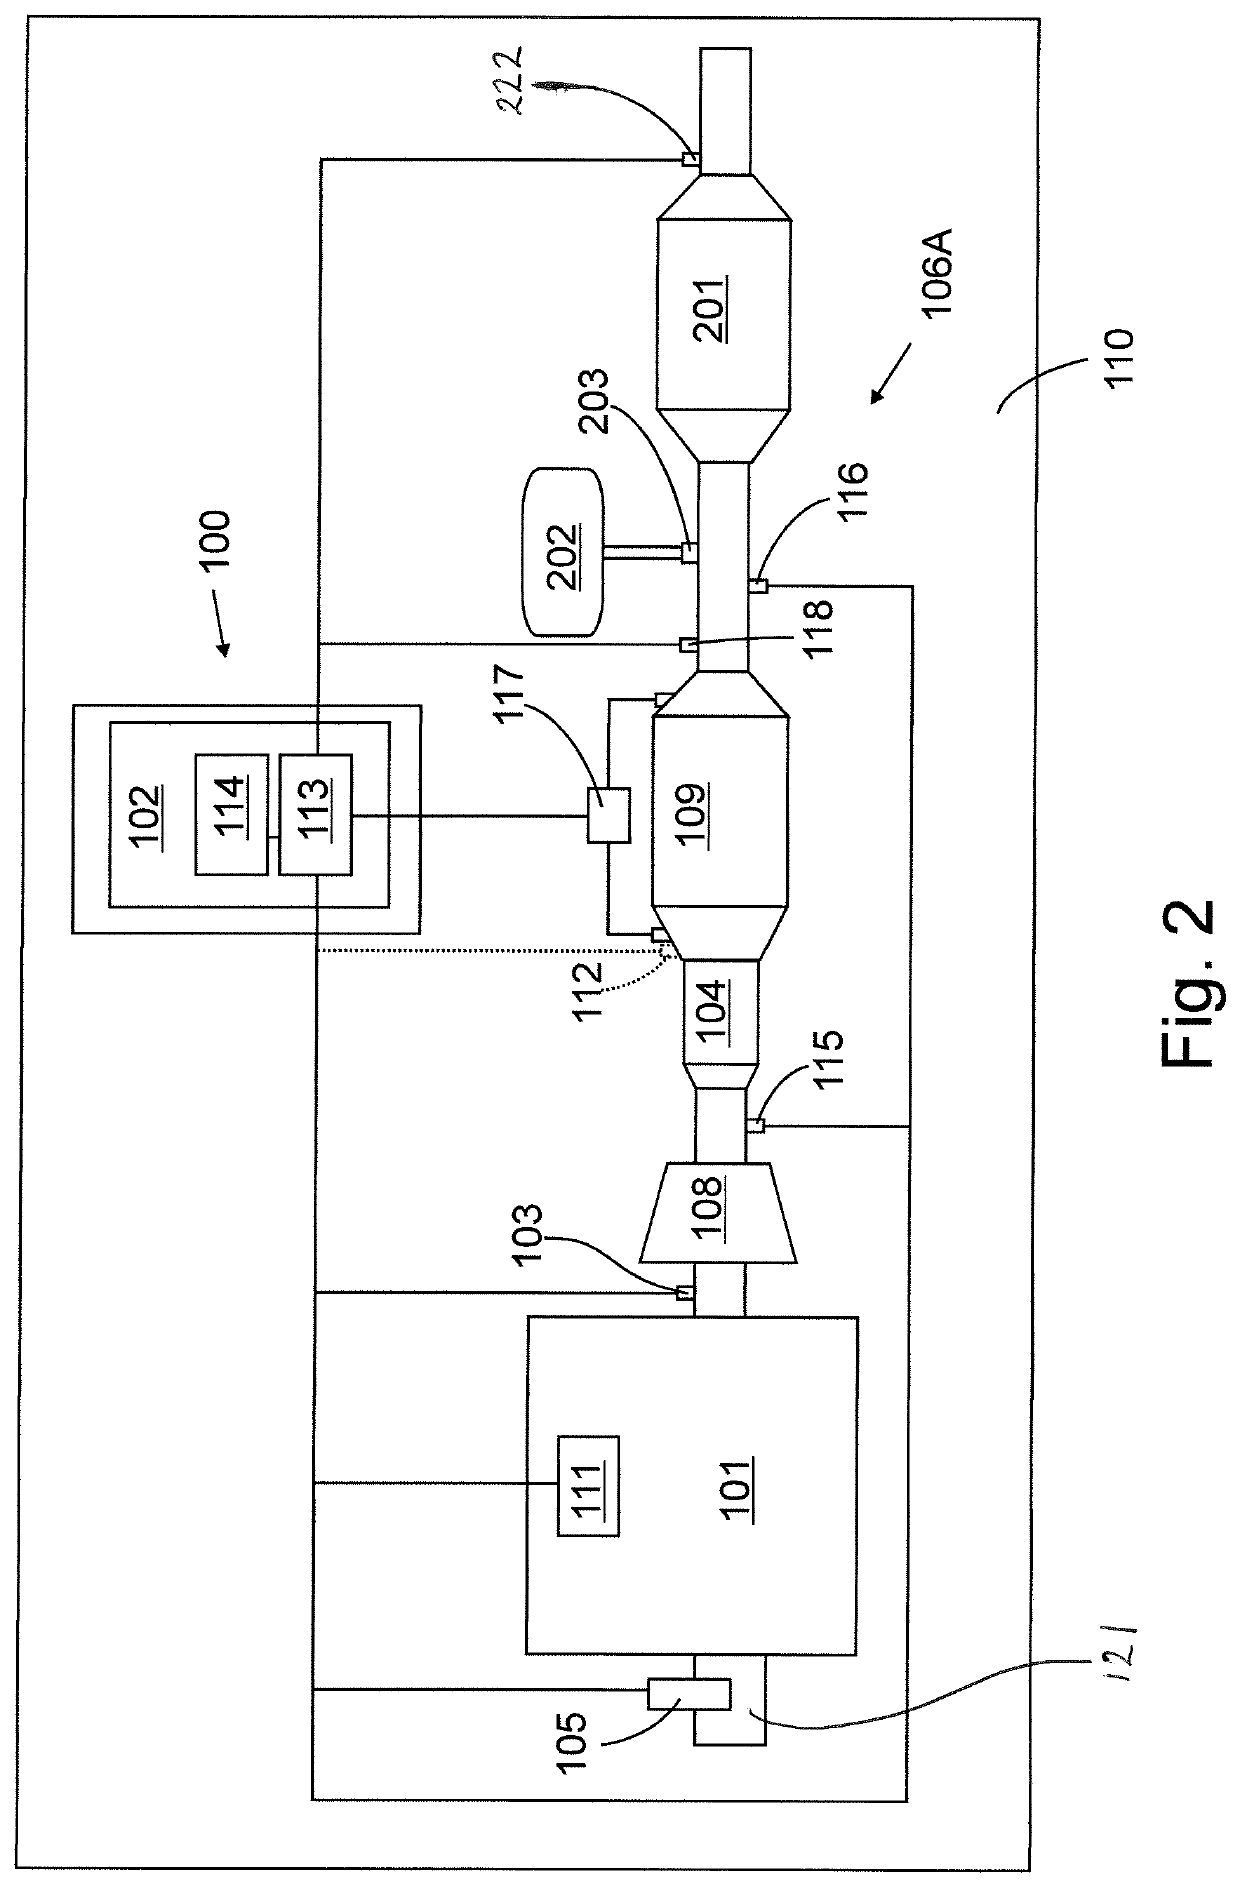 Control of aftertreatment of an internal combustion engine